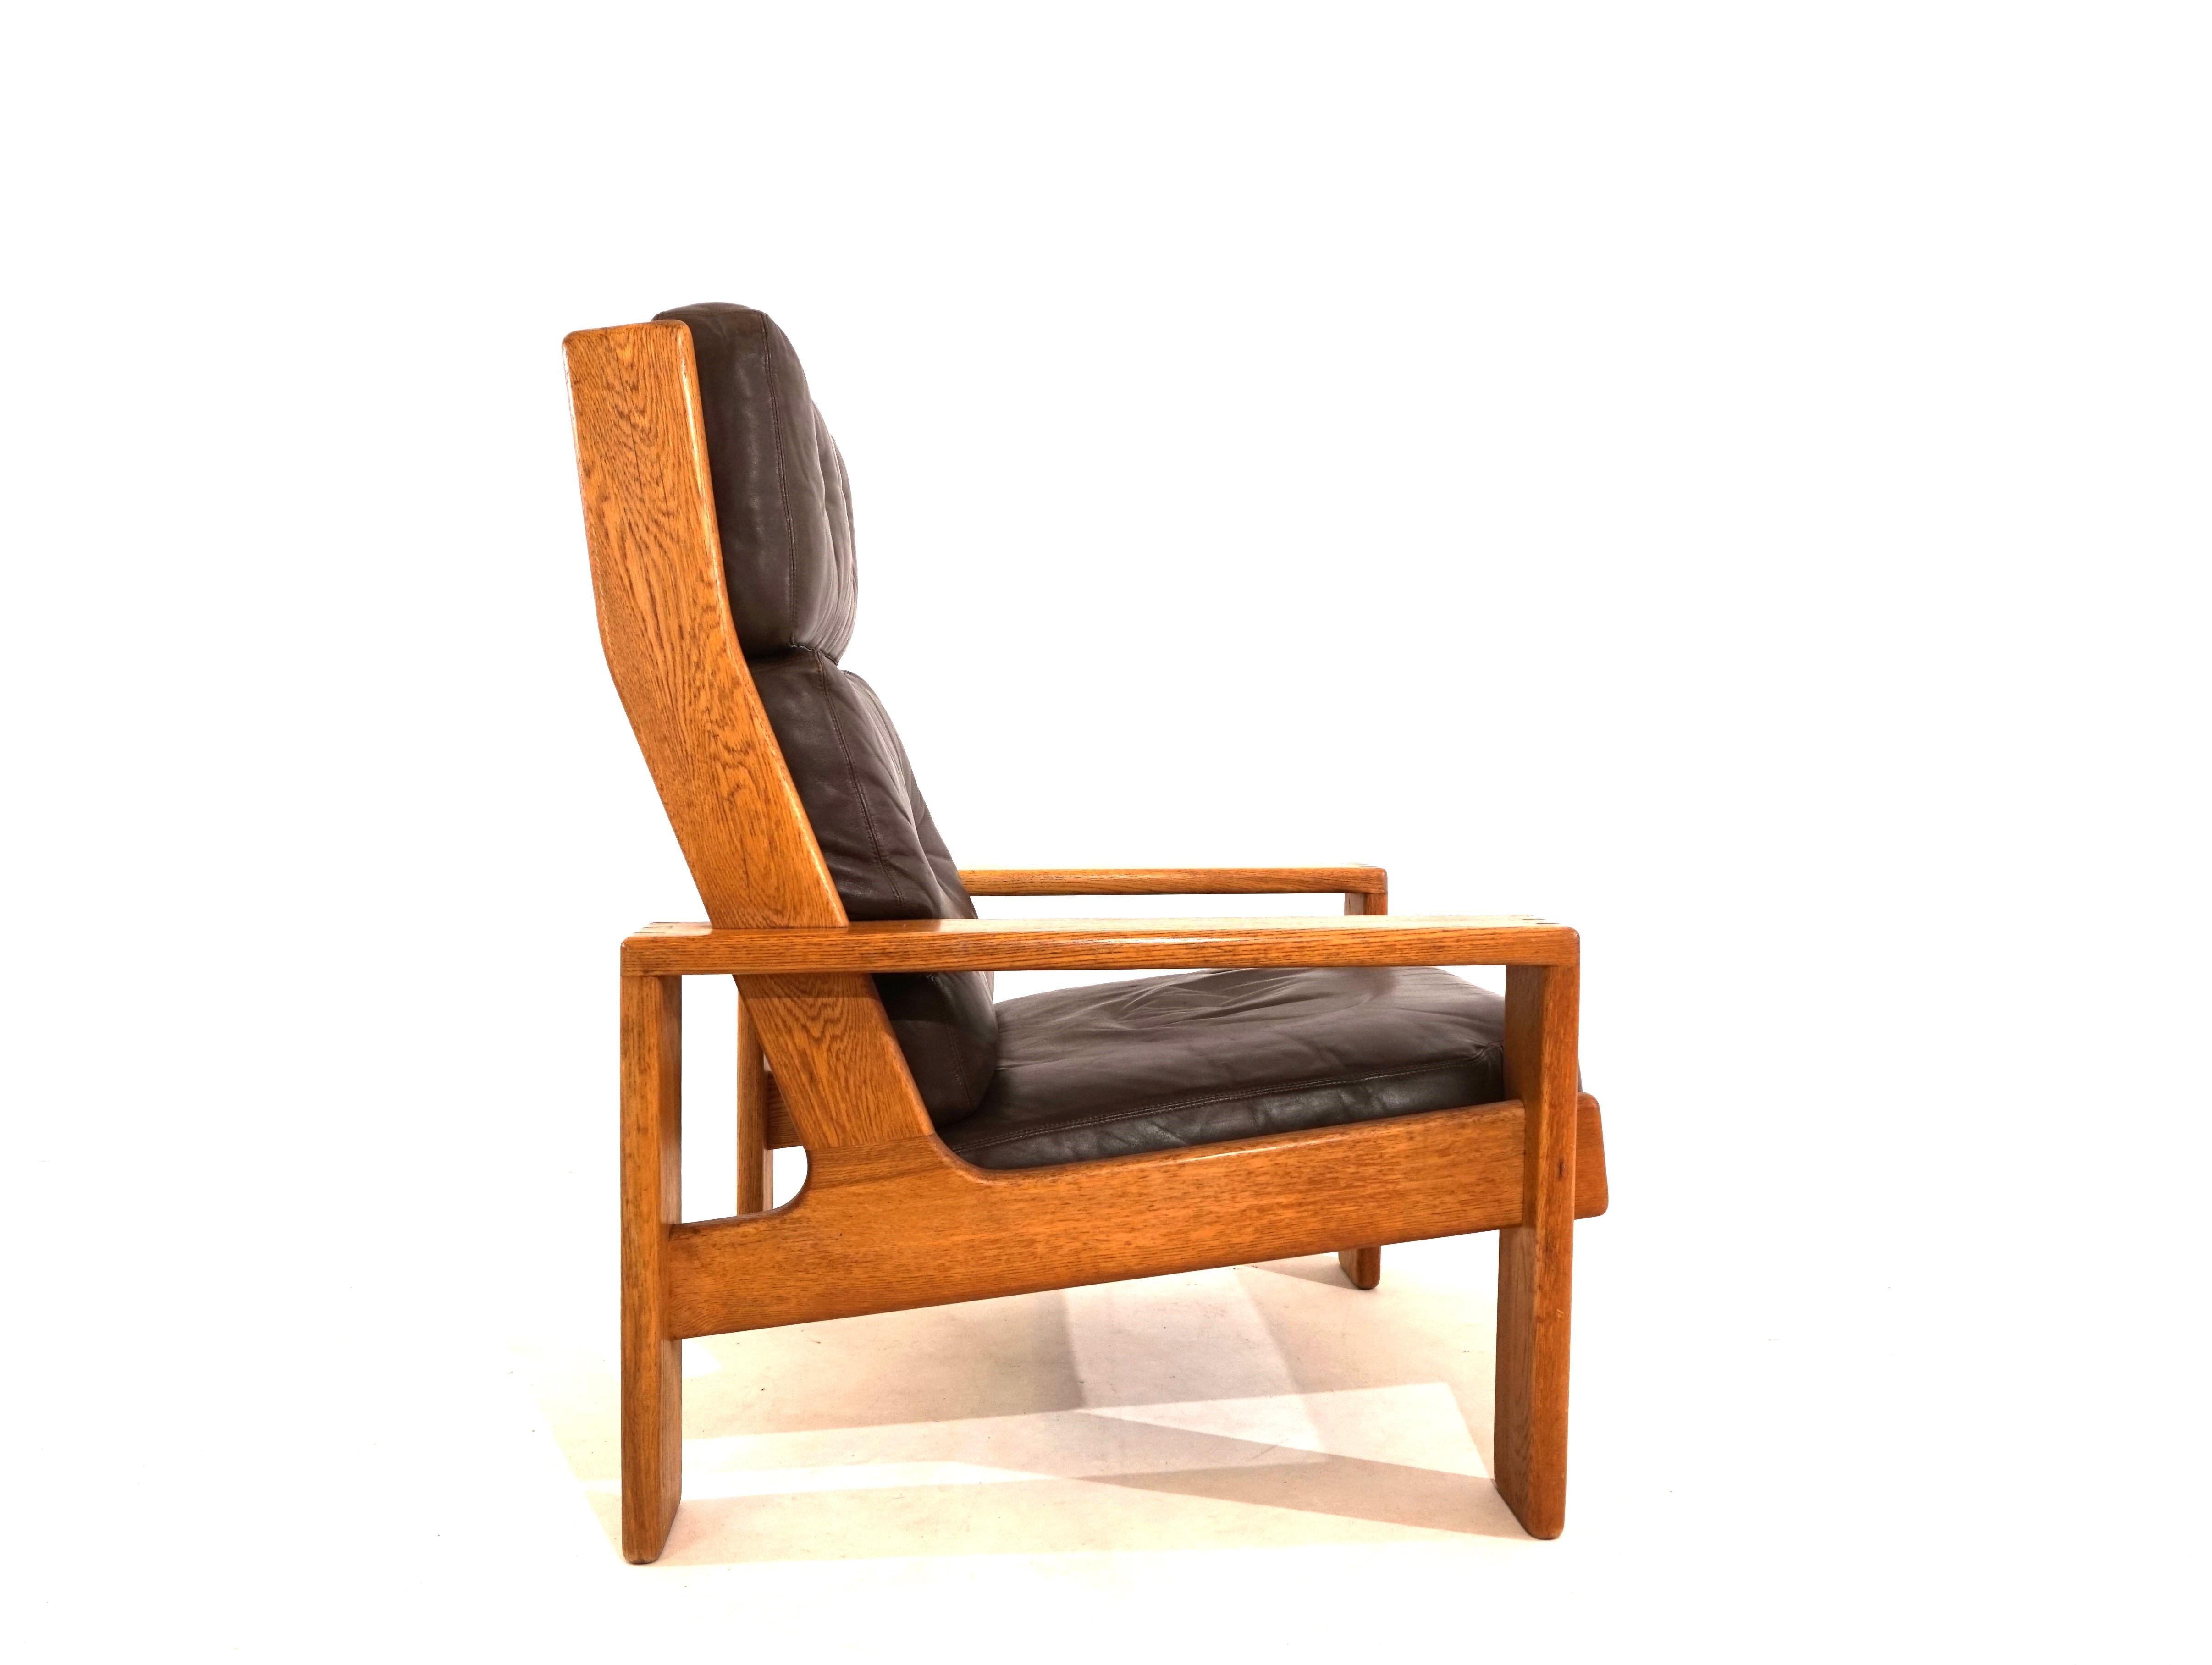 This Bonanza armchair from the 1960s comes in the rare high-back version and in dark brown leather with an oak frame. The armchair shows hardly any signs of wear on the leather, the thick leather is soft and supple. The solid oak frame is in